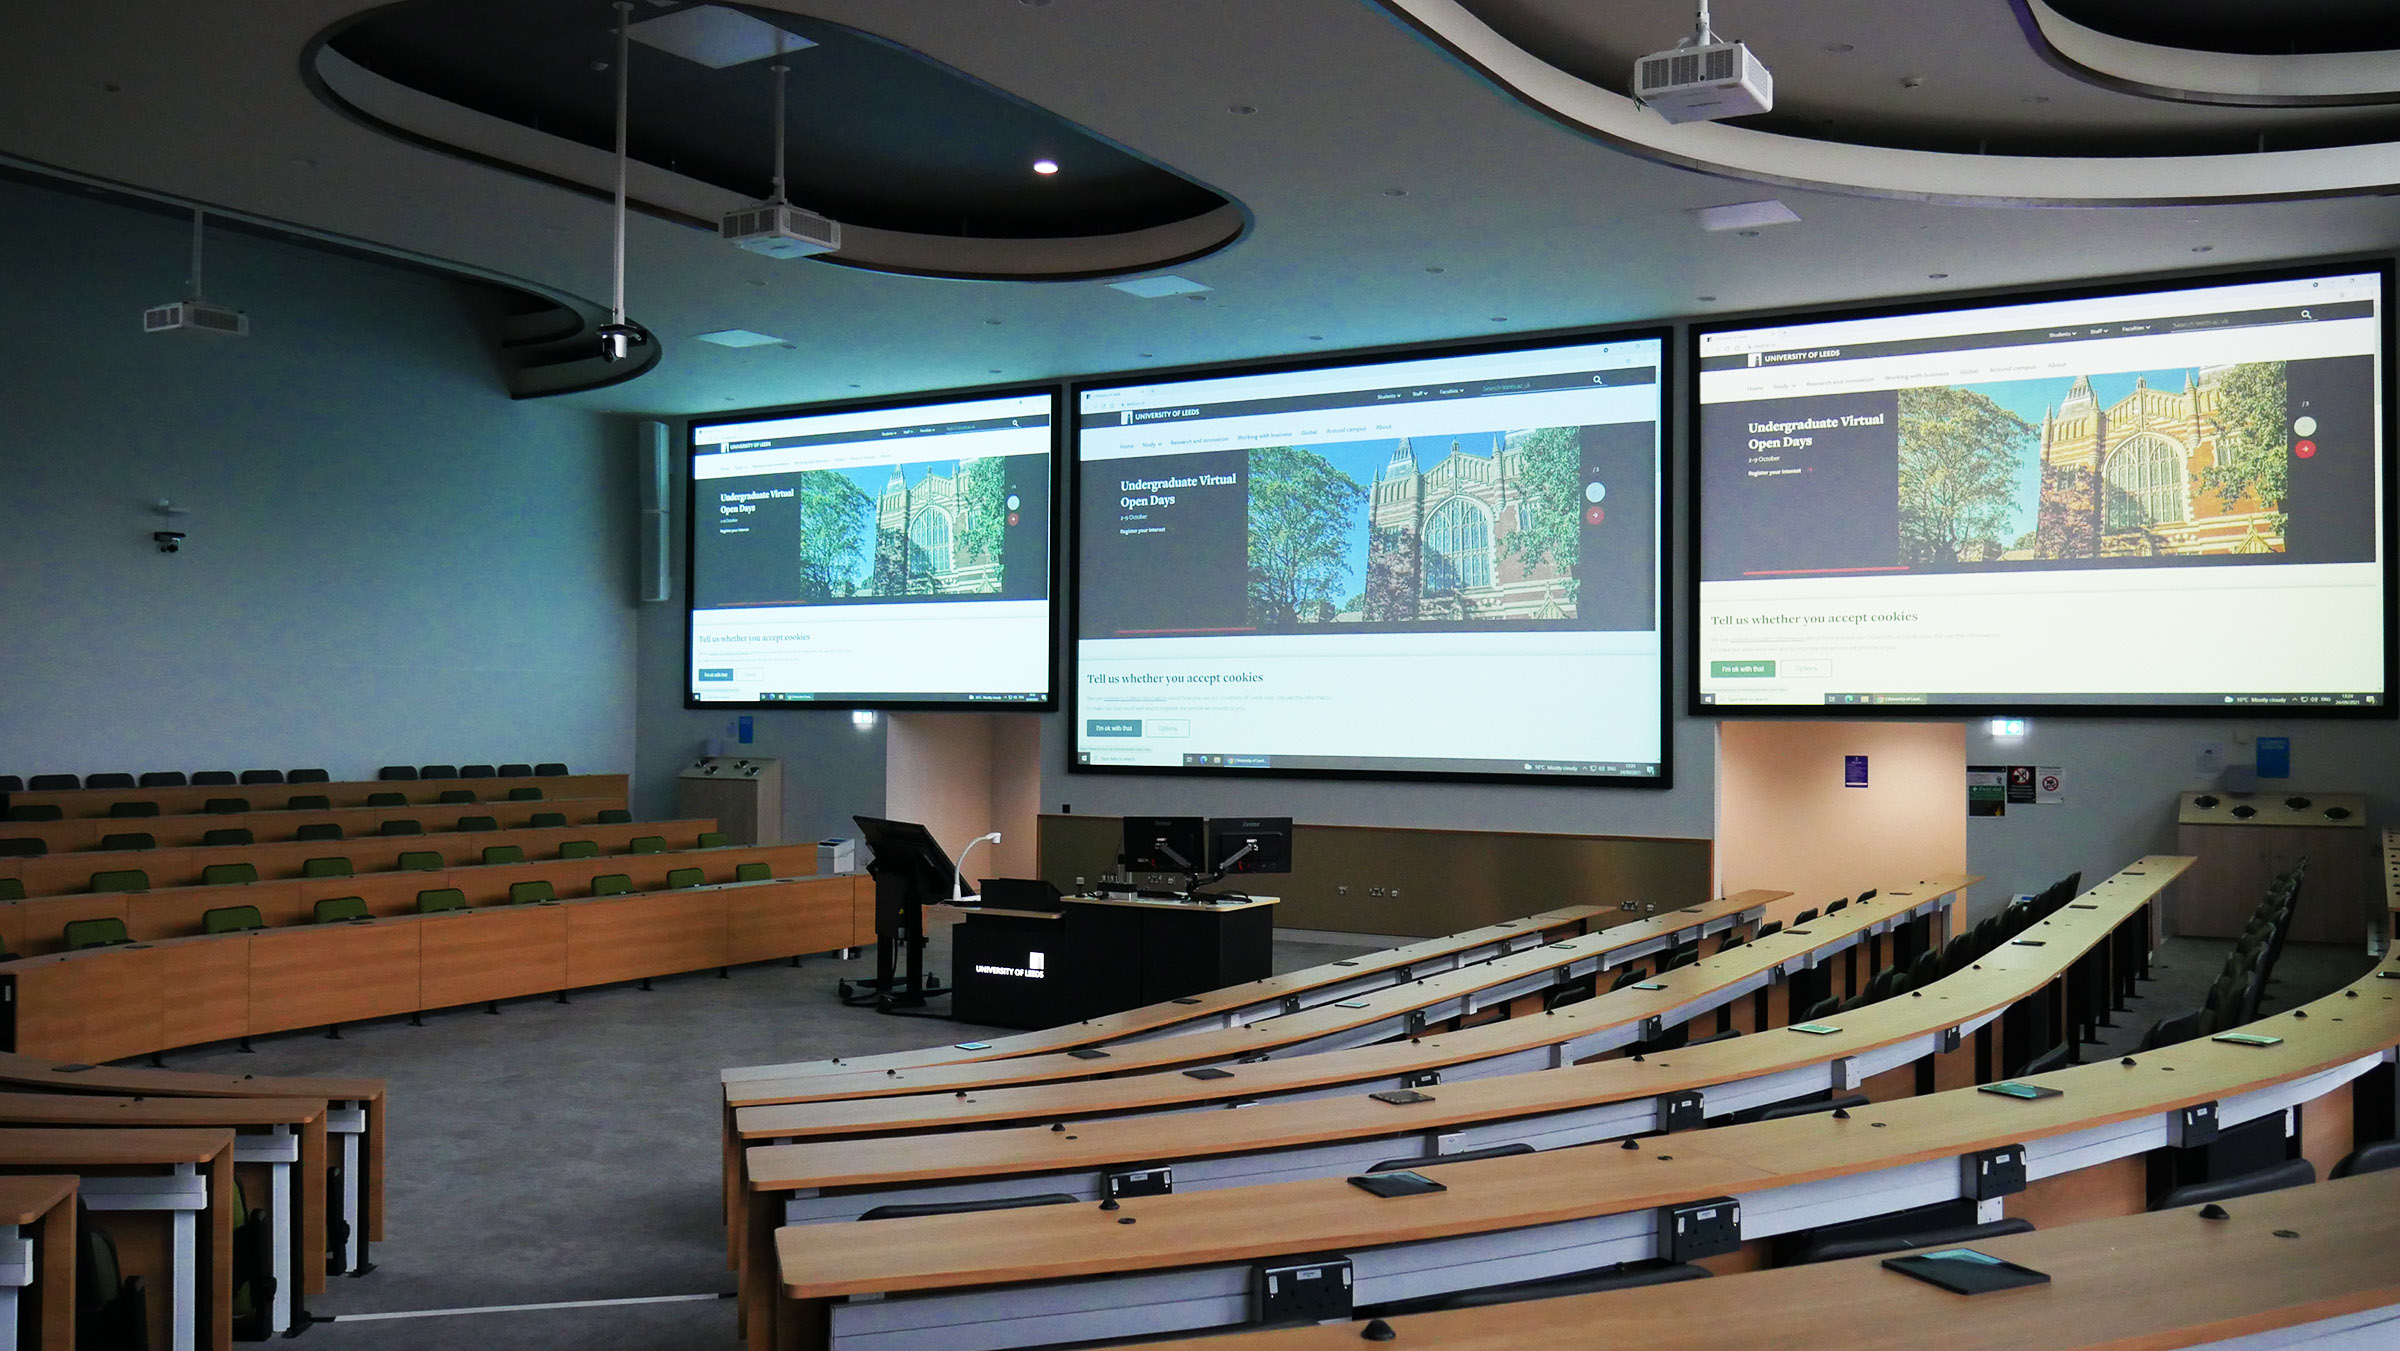 large university lecture theatre with three screens showing content